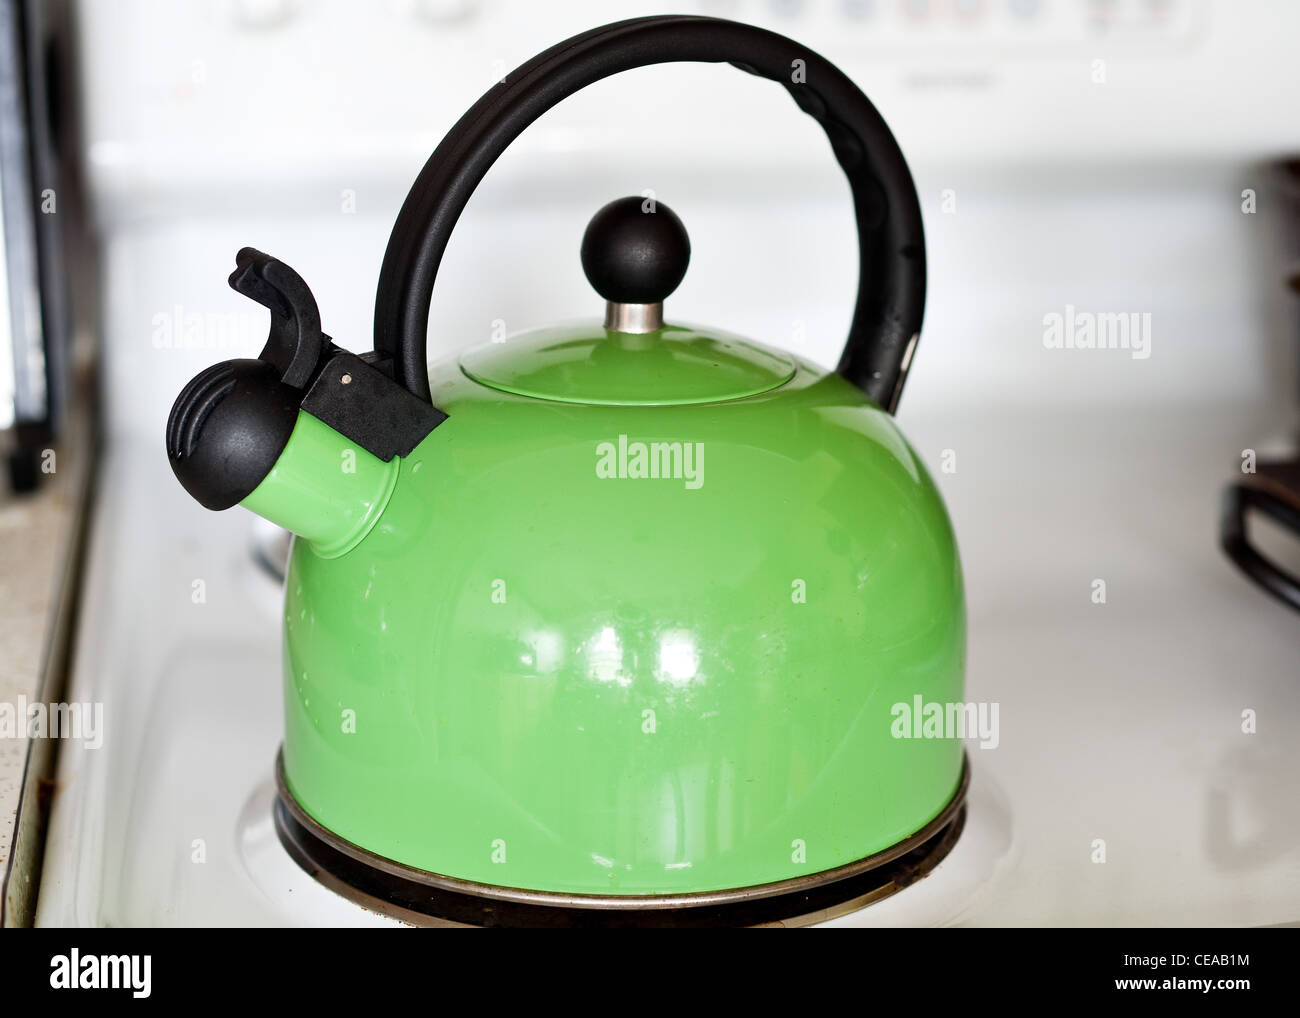 A tea kettle sitting on a stove Stock Photo